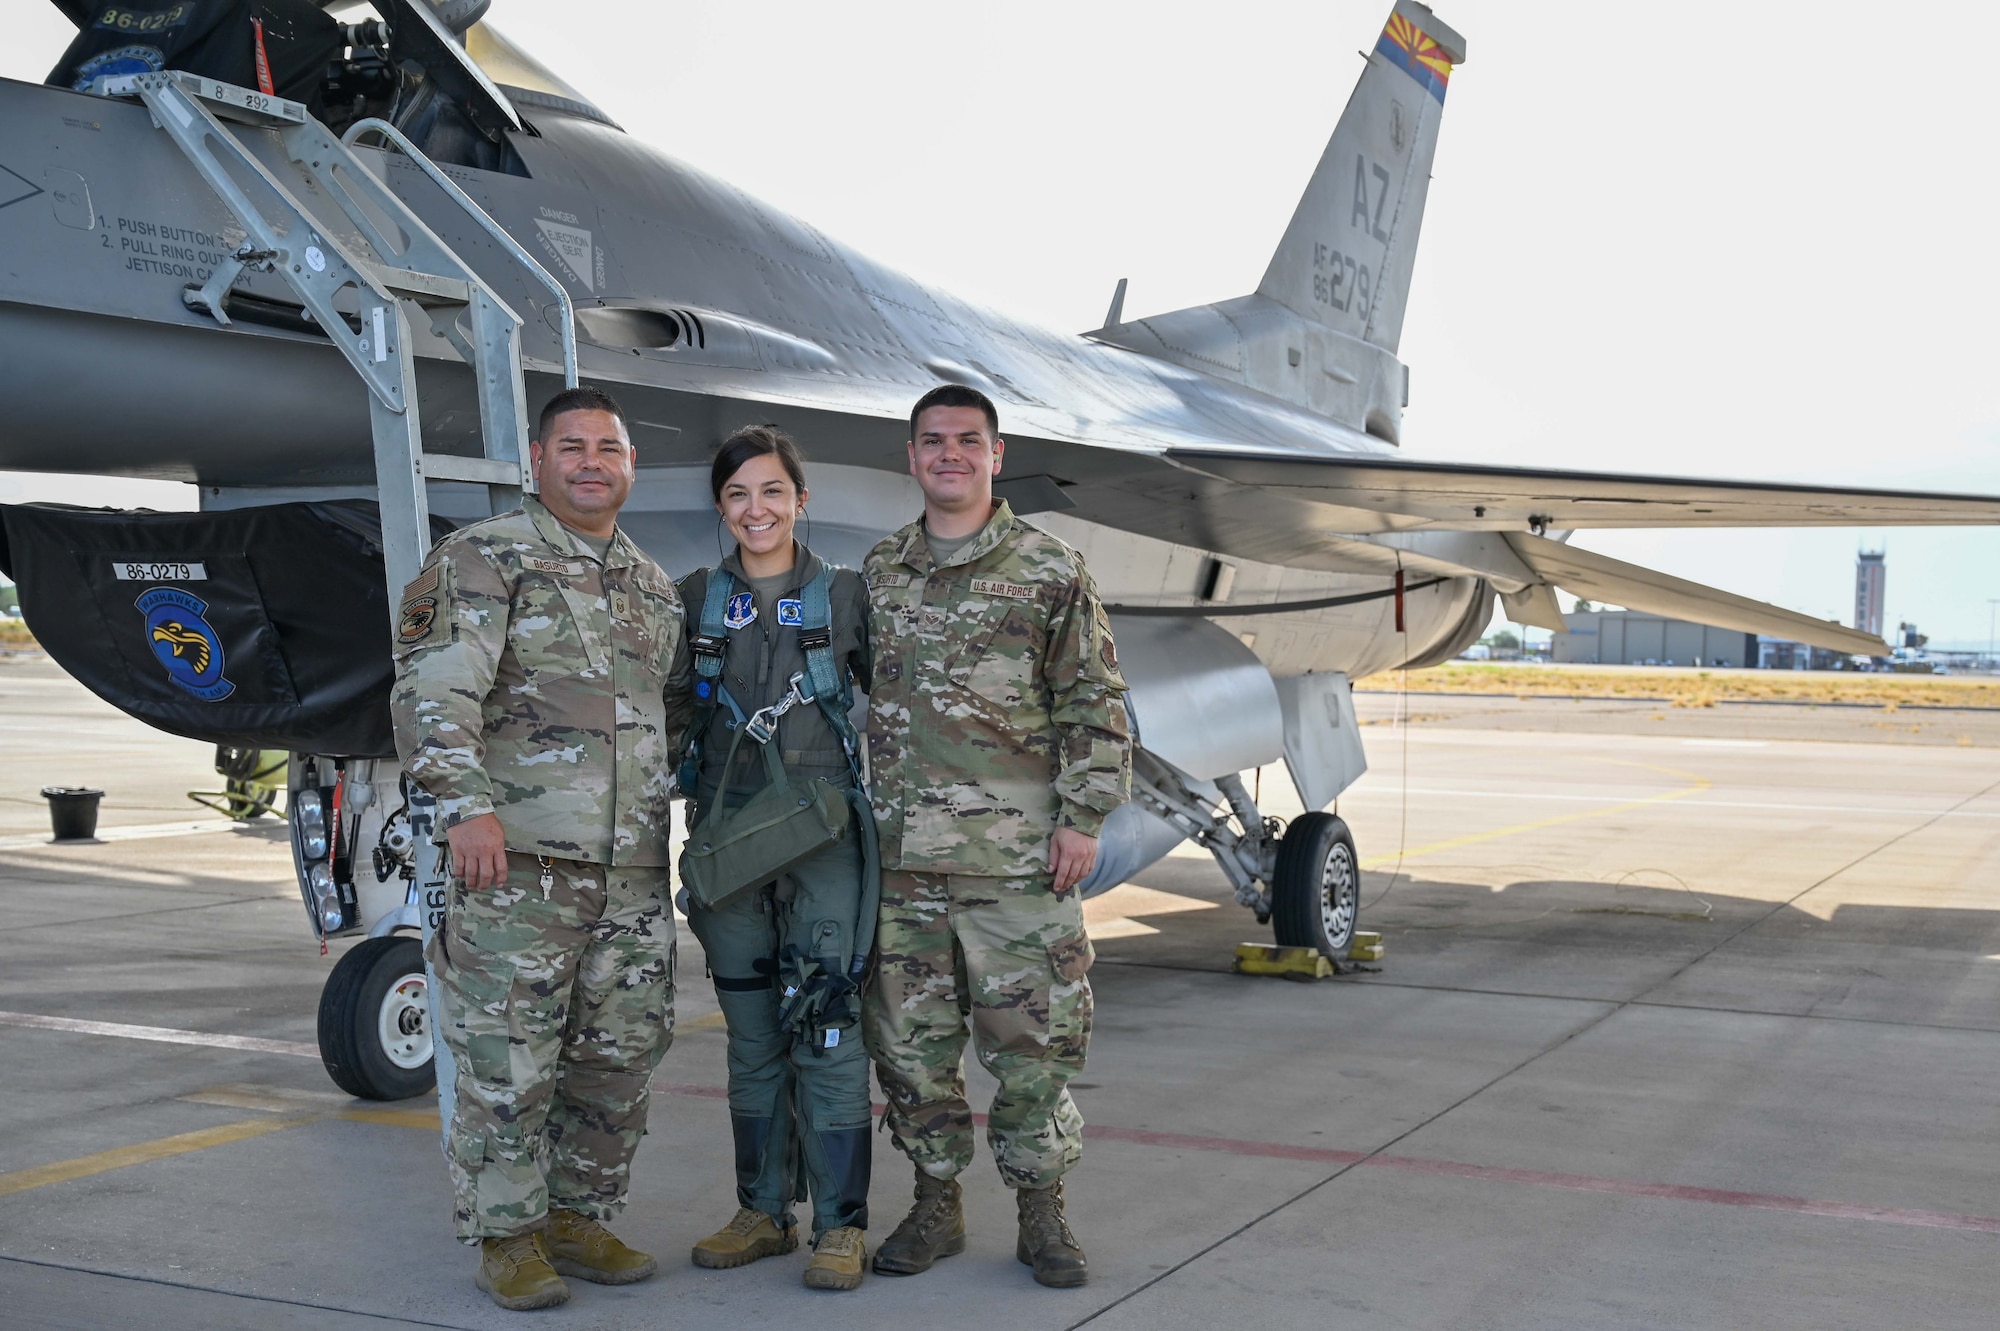 “Family is everything to us. It’s what makes us do what we do,” said Master Sgt. Raul Basurto, Jr., left. Basurto and his son, Raul Basurto III, right, work on the F-16s that their cousin, 1st Lt. Alyssa Majuta, flies at the Morris Air National Guard Base in Tucson, Arizona. (U.S. Air National Guard photo by Maj. Angela Walz)